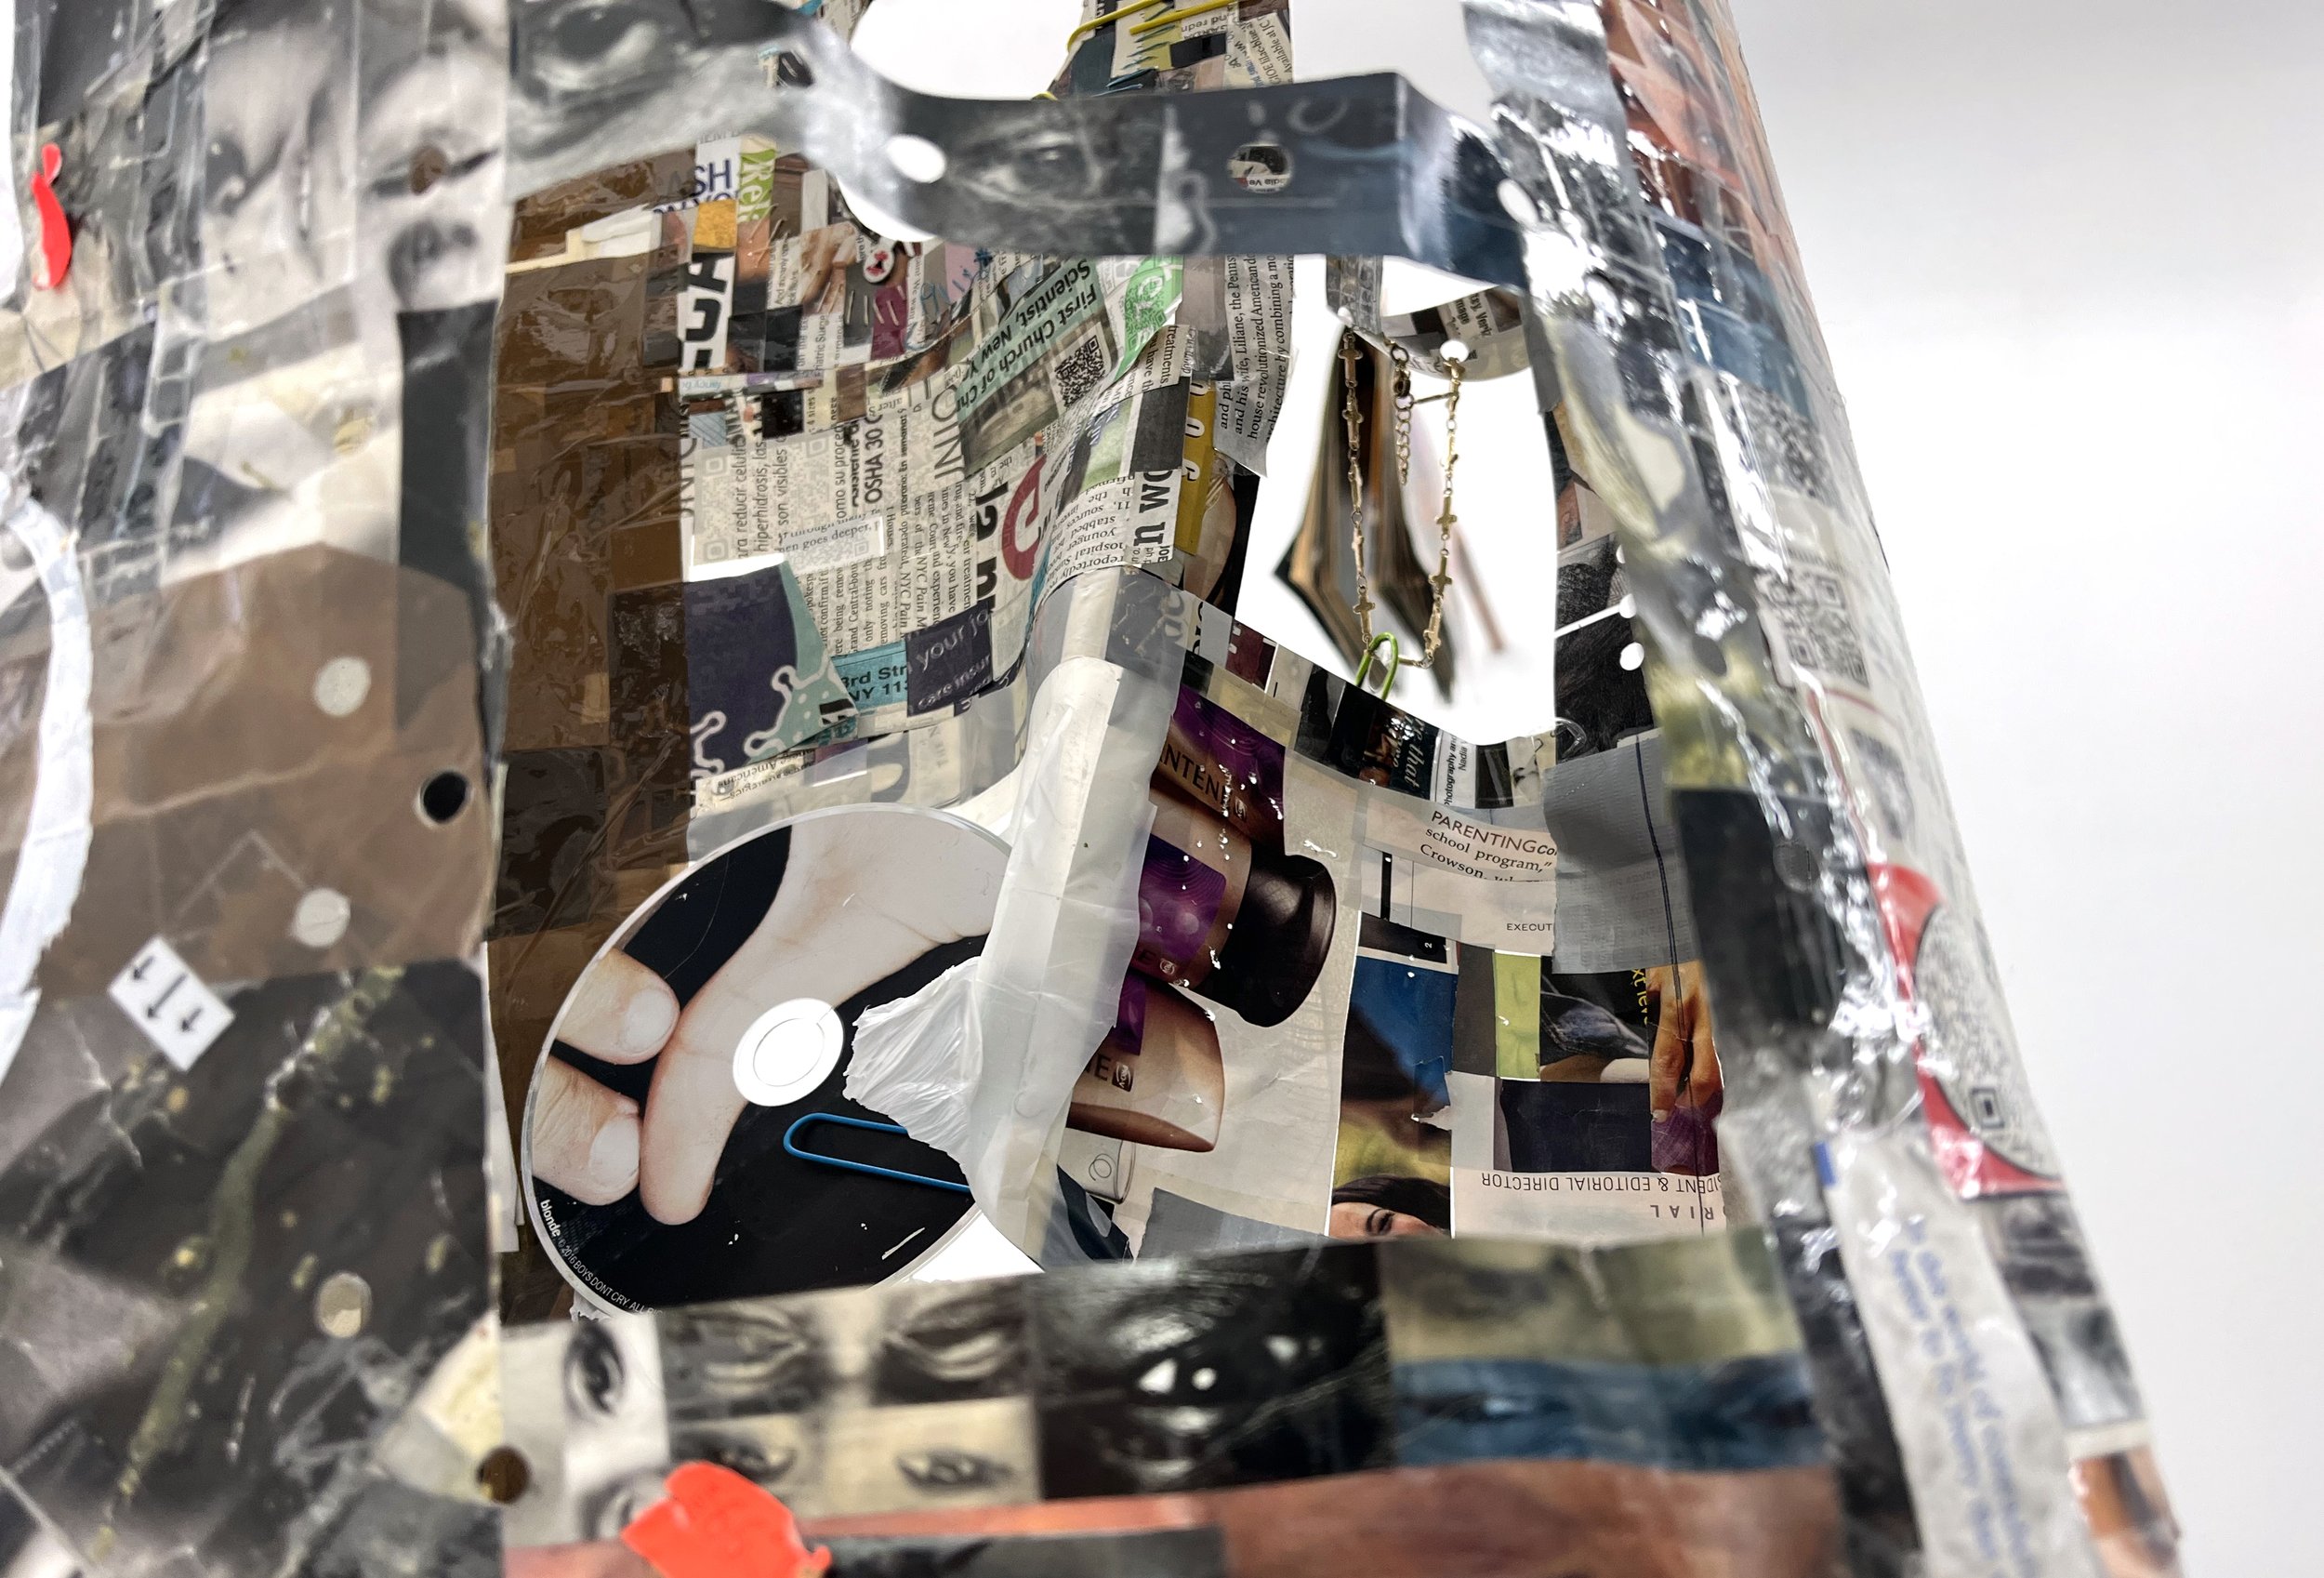  Elzie Williams III  If I Ruled The World (Time Traveler Bag) , 2023 (detail) magazines, found qr codes, clear tape, found objects, copper  26 x 18 x 6 inches (66 x 46 x 15 cm) EW9 